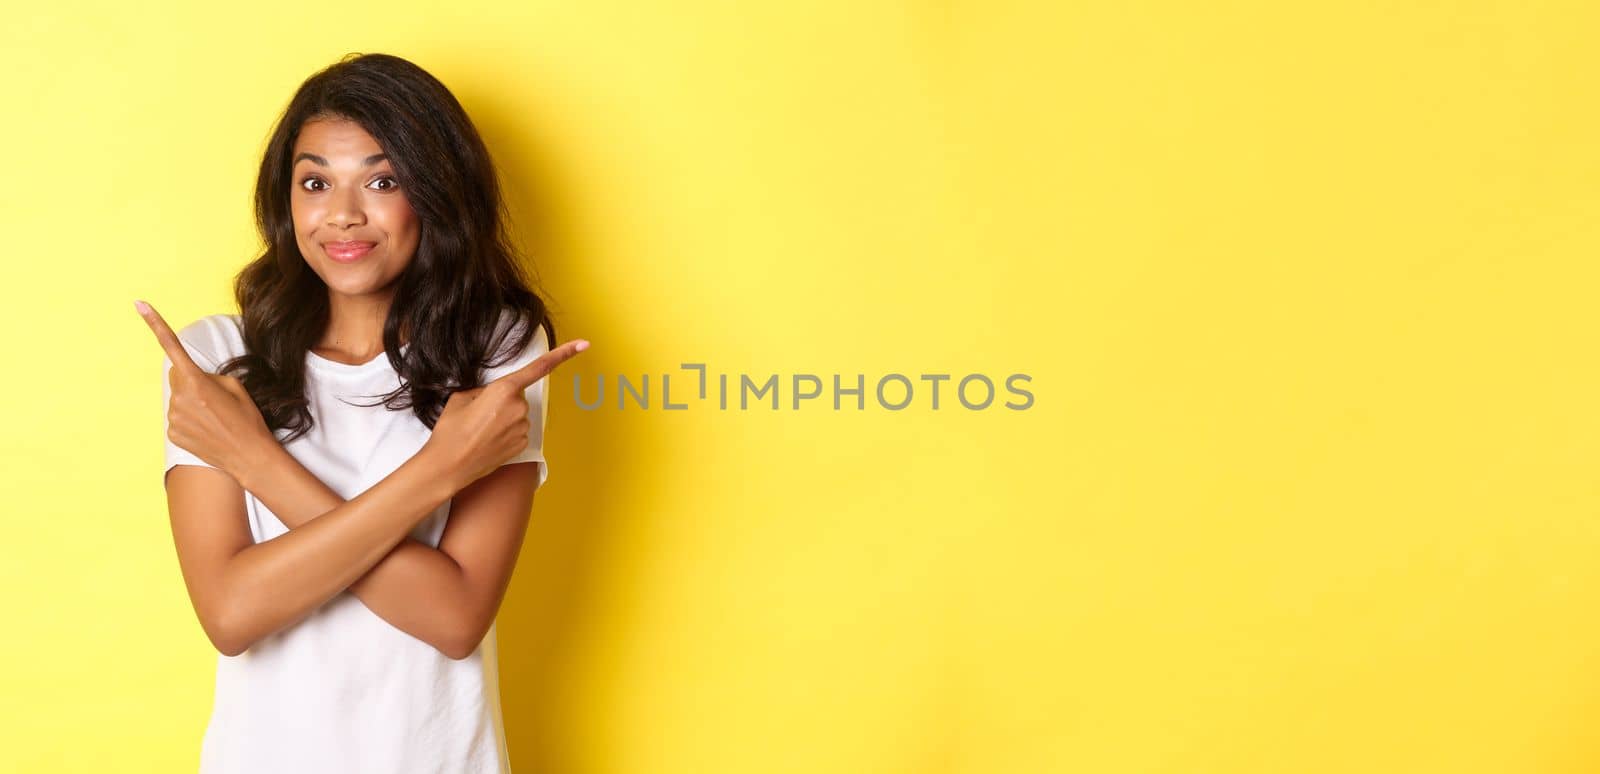 Portrait of cute indecisive african american girl, pointing fingers sideways and shrugging, asking advice with choices, standing over yellow background.